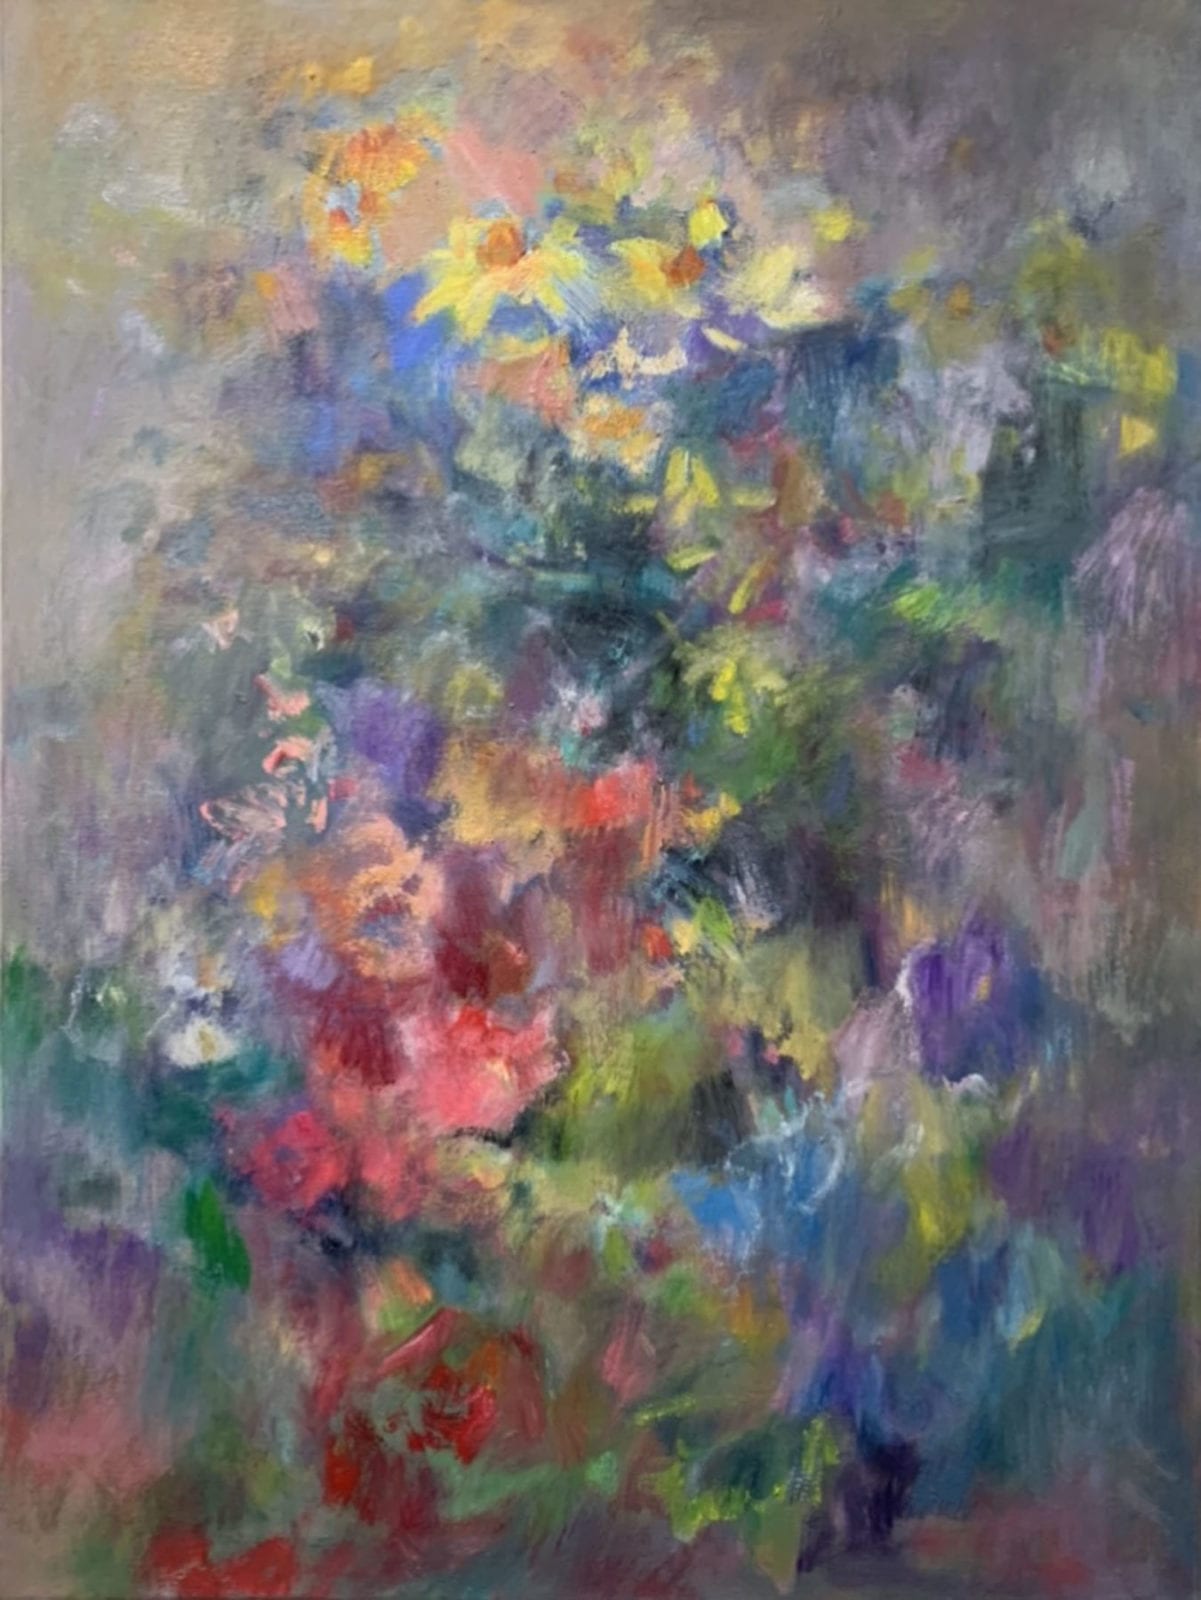 Zakia Ahmed, Wild Flowers, oil on canvas, 18x24 inches